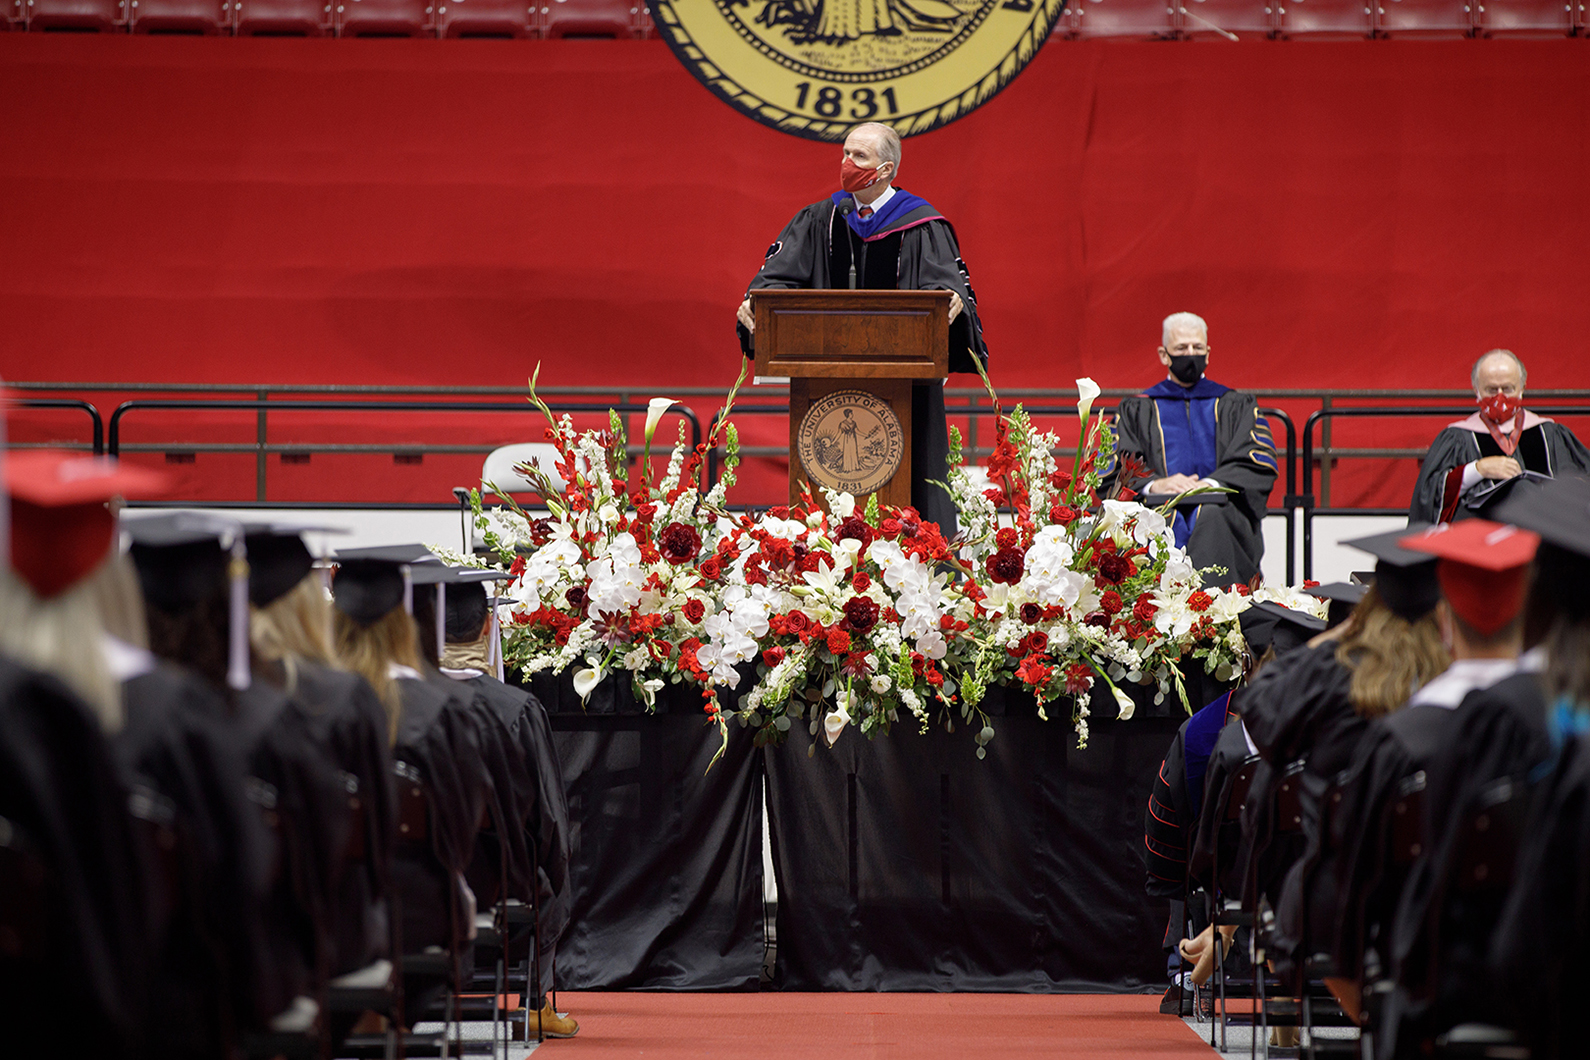 Dr. Bell speaks to students on stage at summer commencement.